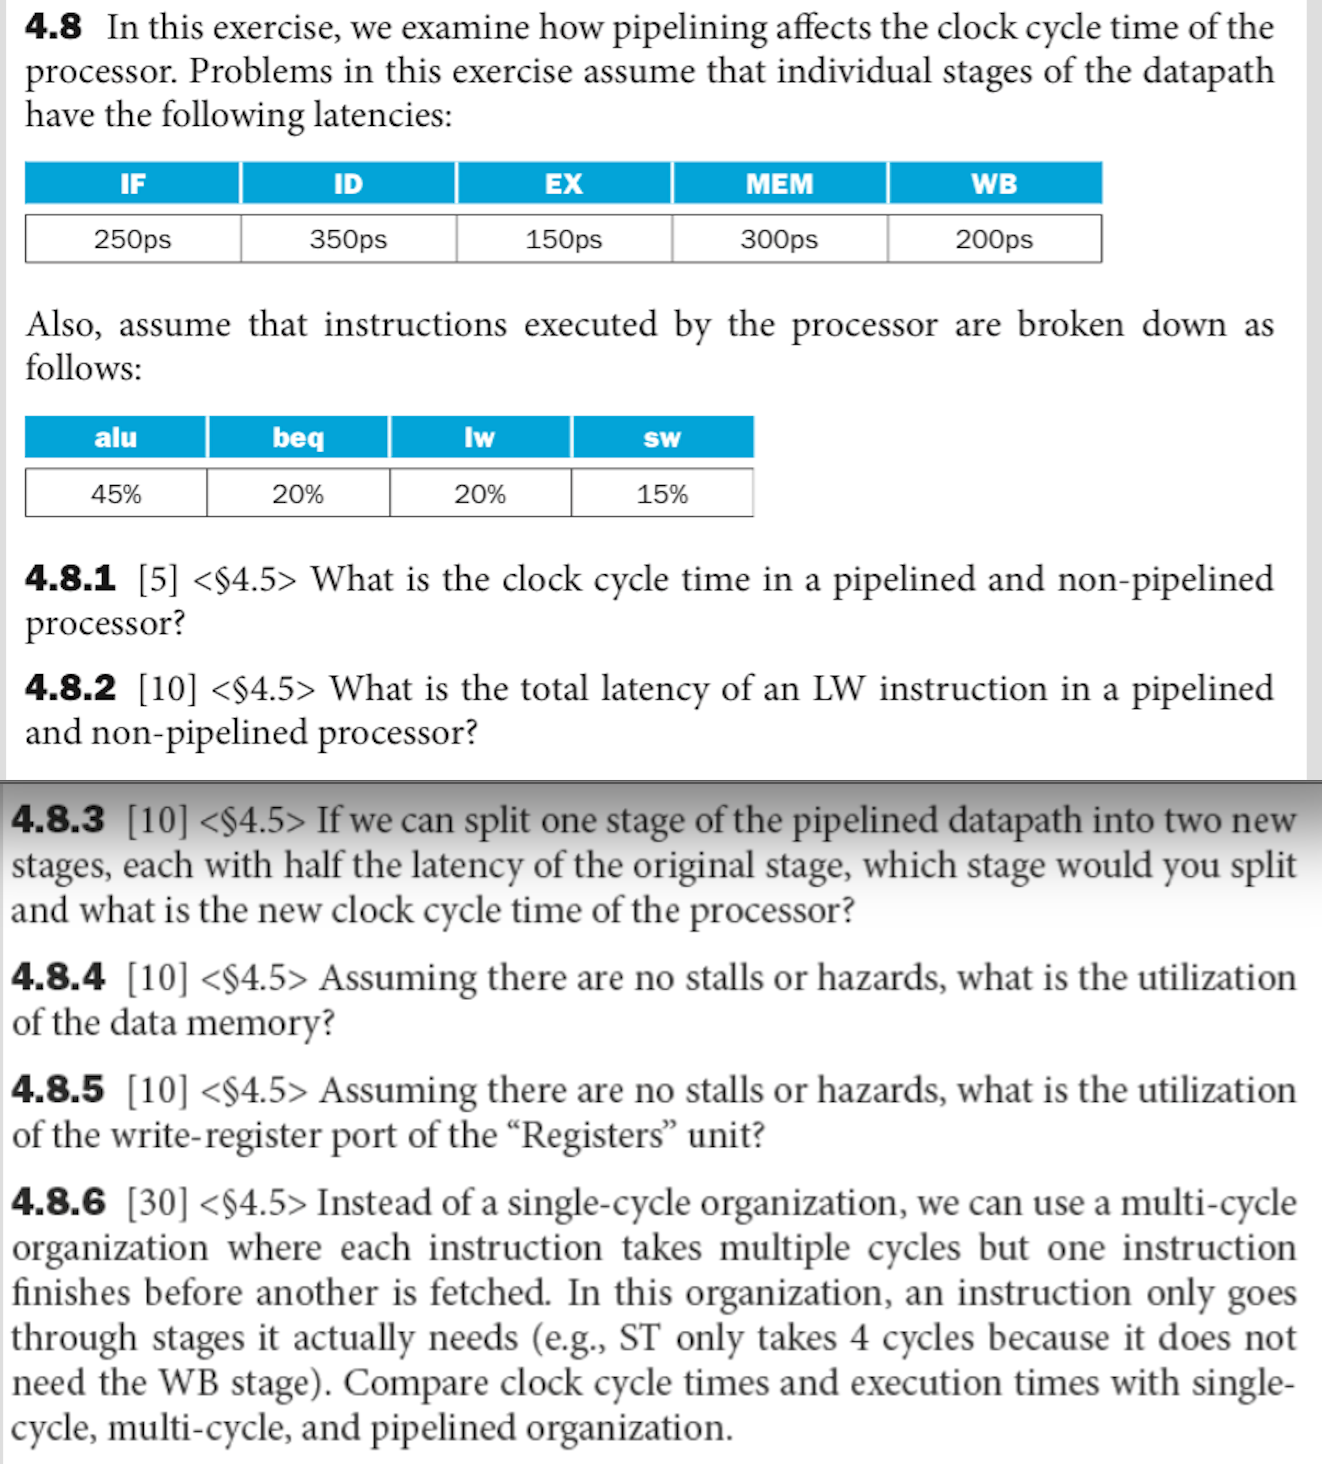 4.8 In this exercise, we examine how pipelining affects the clock cycle time of the processor. Problems in this exercise assume that individual stages of the data path have the following latencies: Also, assume that instructions executed by the processor are broken down as follows: 4.8.1 [5] What is the clock cycle time in a pipelined and non-pipelined processor? 4.8.2 [10] What is the total latency of an LW instruction in a pipelined and non-pipelined processor? 4.8.3 [10] If we can split one stage of the pipelined data path into two new stages, each with half the latency of the original stage, which stage would you split and what is the new clock cycle time of the processor? 4.8.4 [101 Assuming there are no stalls or hazards, what is the utilization of the data memory? 4.8.5 [10] Assuming there are no stalls or hazards, what is the utilization of the write-register port of the Registers unit? 4.8.6 [30] Instead of a single-cycle organization, we can use a multi-cycle organization where each instruction takes multiple cycles but one instruction finishes before another is fetched. In this organization, an instruction only goes through stages it actually needs (e.g., ST only takes 4 cycles because it does not need the WB stage). Compare clock cycle times and execution times with single cycle, multi-cycle, and pipelined organization.